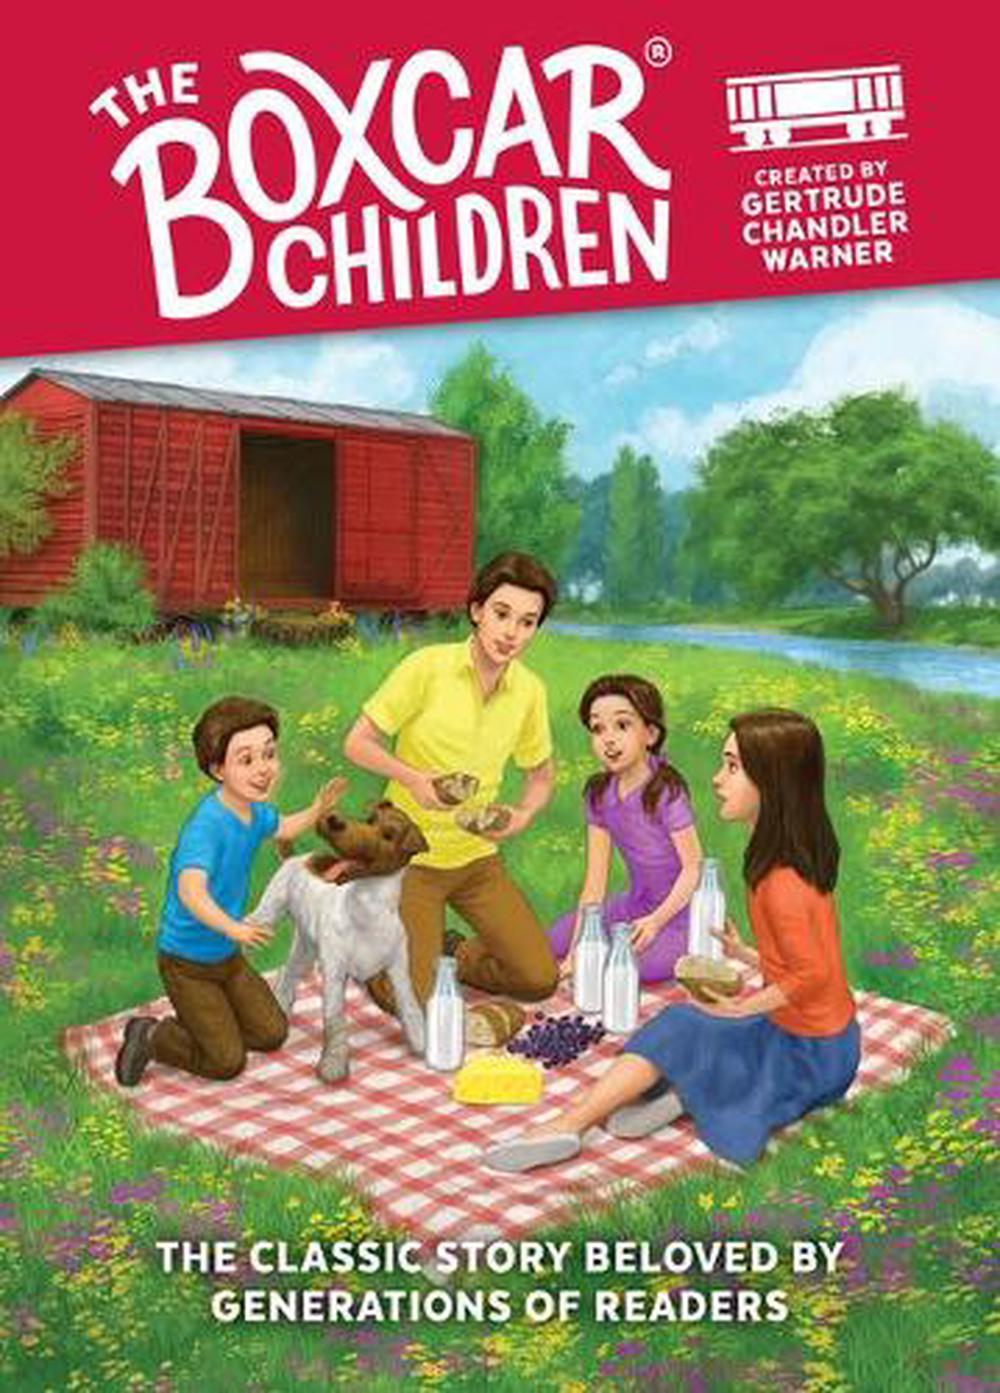 the-boxcar-children-by-gertrude-chandler-warner-english-library